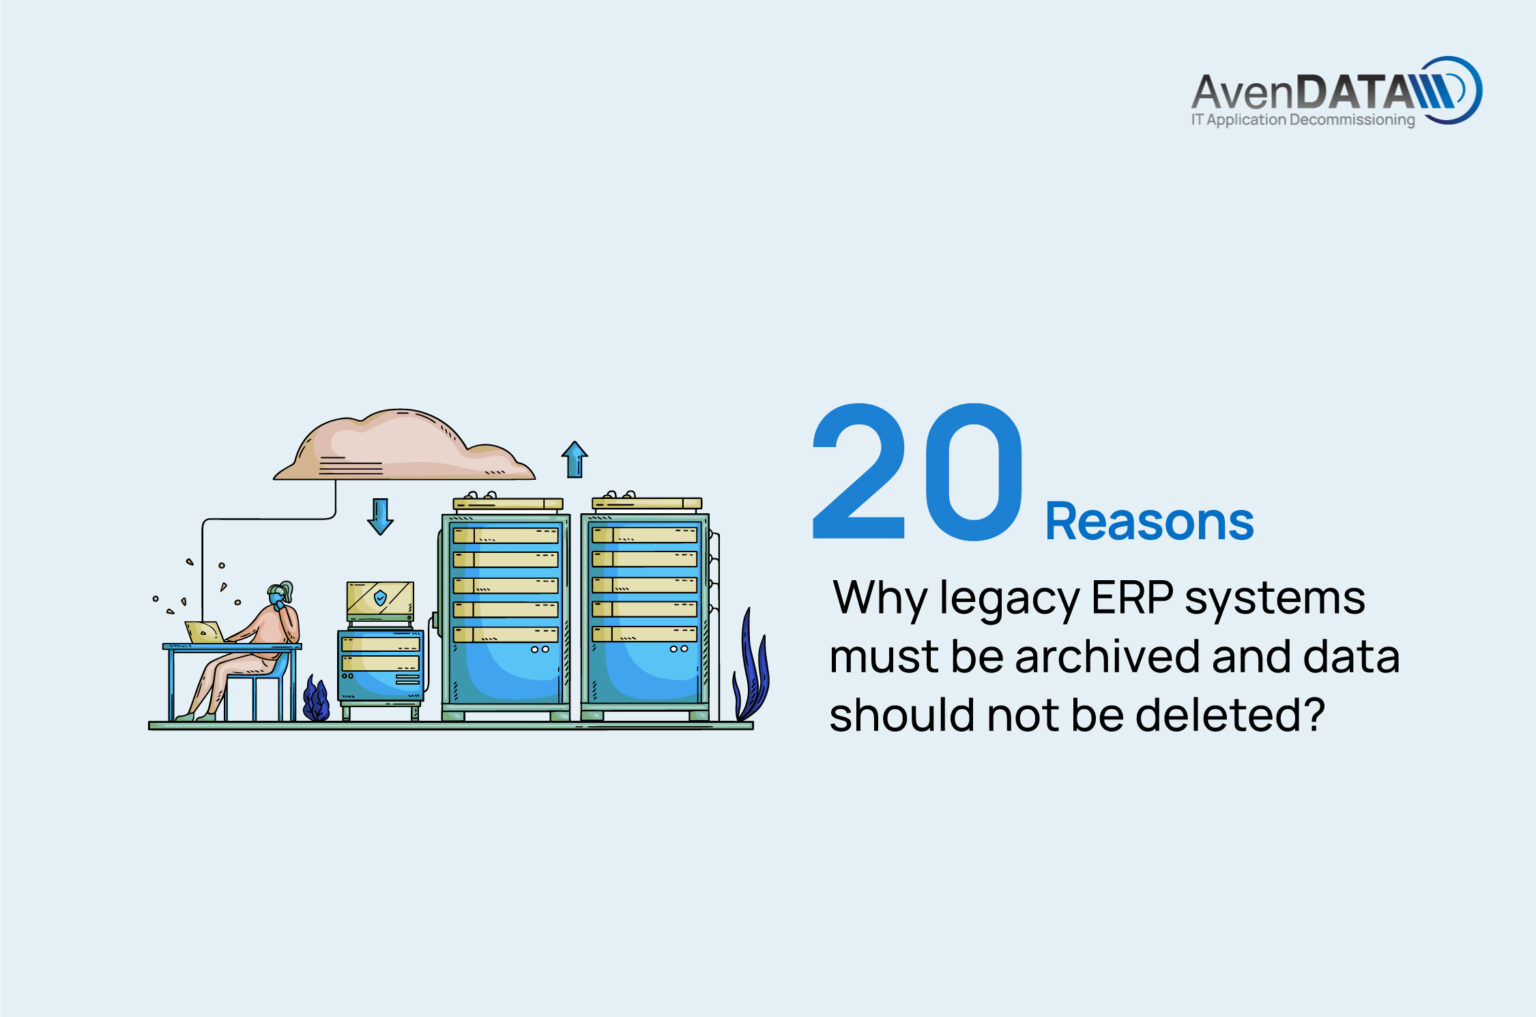 20 Reasons why legacy ERP systems must be archived by AvenDATA